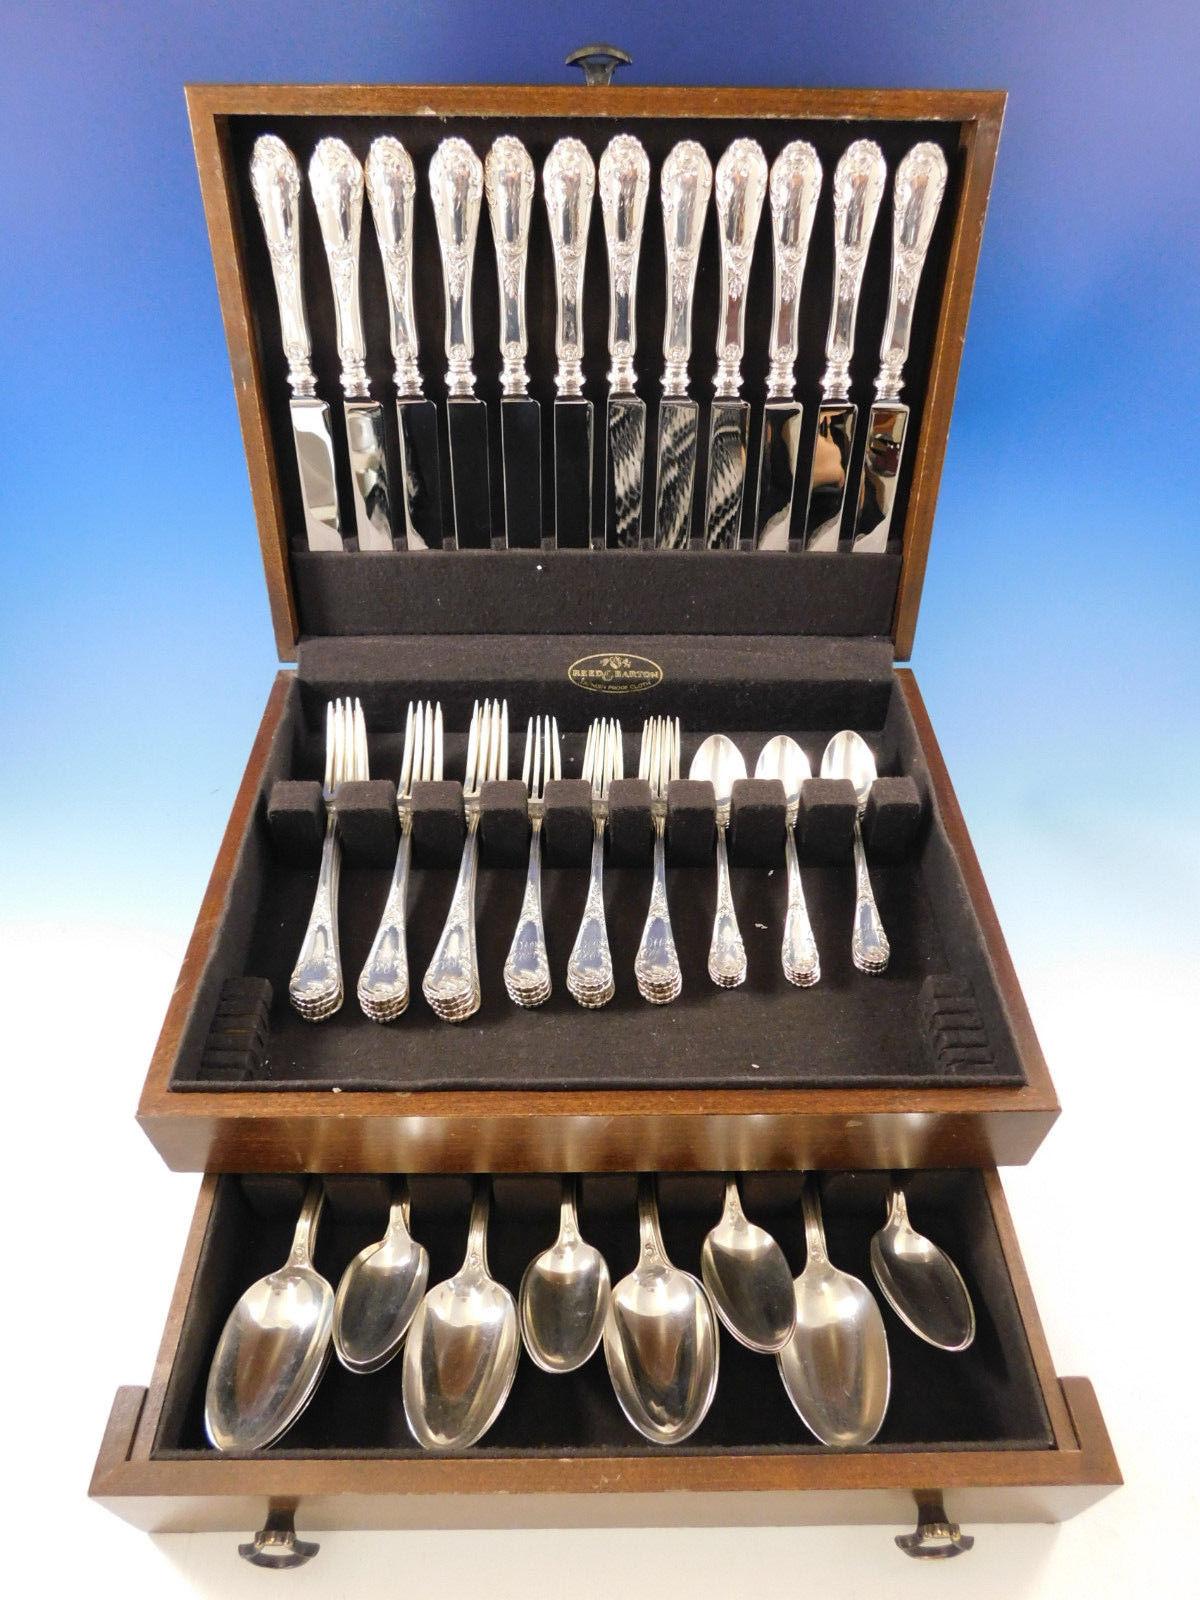 Dinner size Louis XIV Old style by Dominick & Haff sterling silver flatware set, 72 pieces. This set includes:

12 dinner size knives, 10 1/4